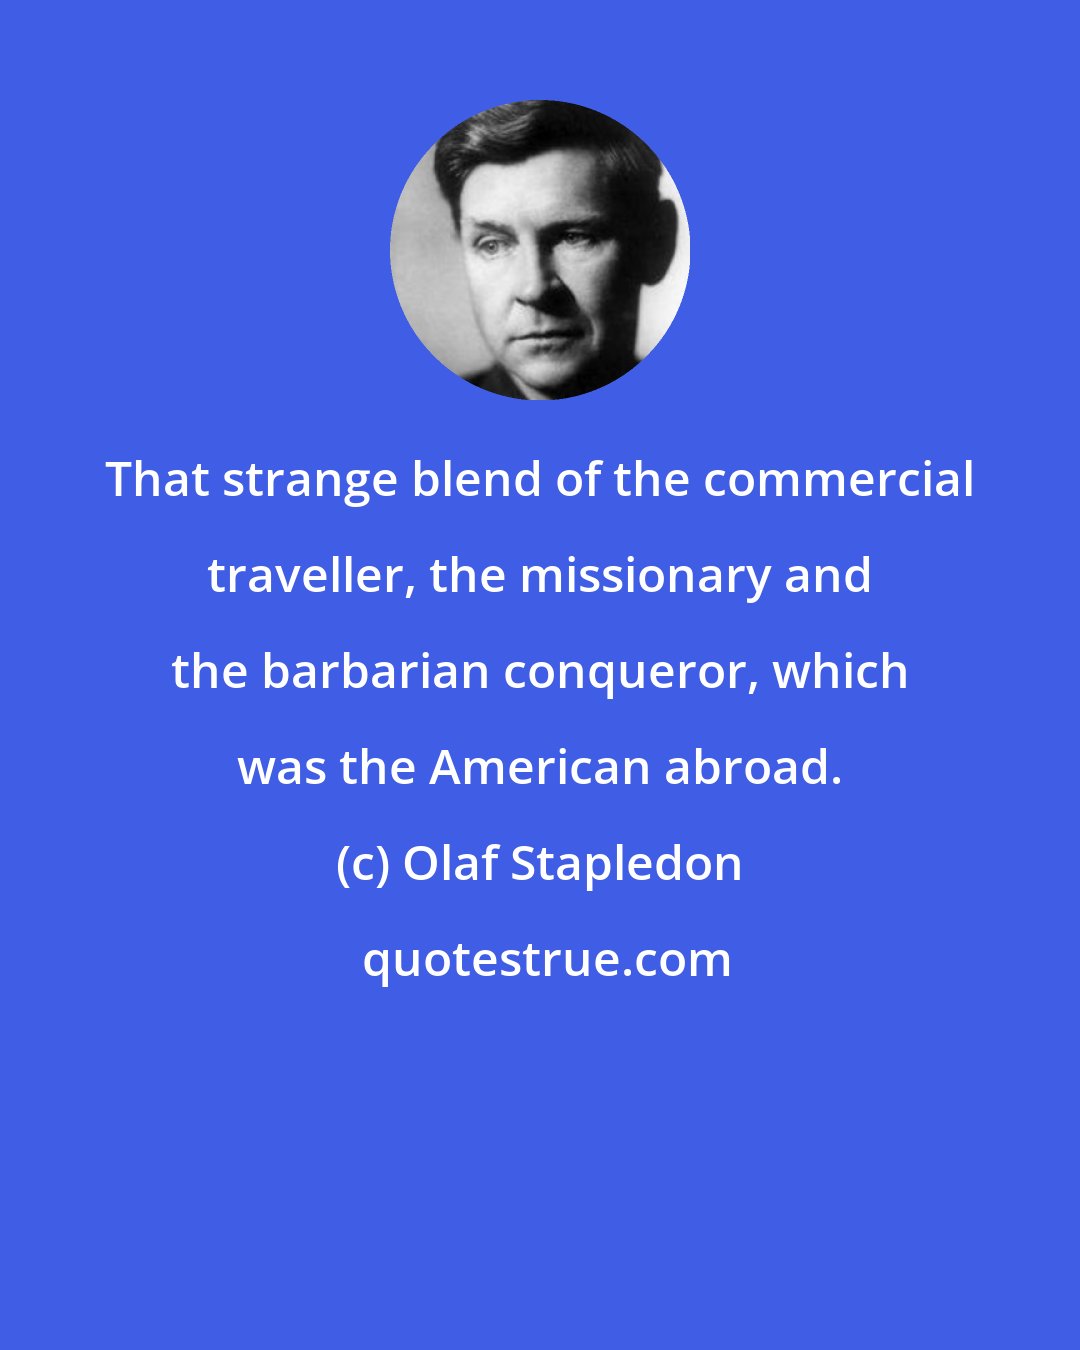 Olaf Stapledon: That strange blend of the commercial traveller, the missionary and the barbarian conqueror, which was the American abroad.